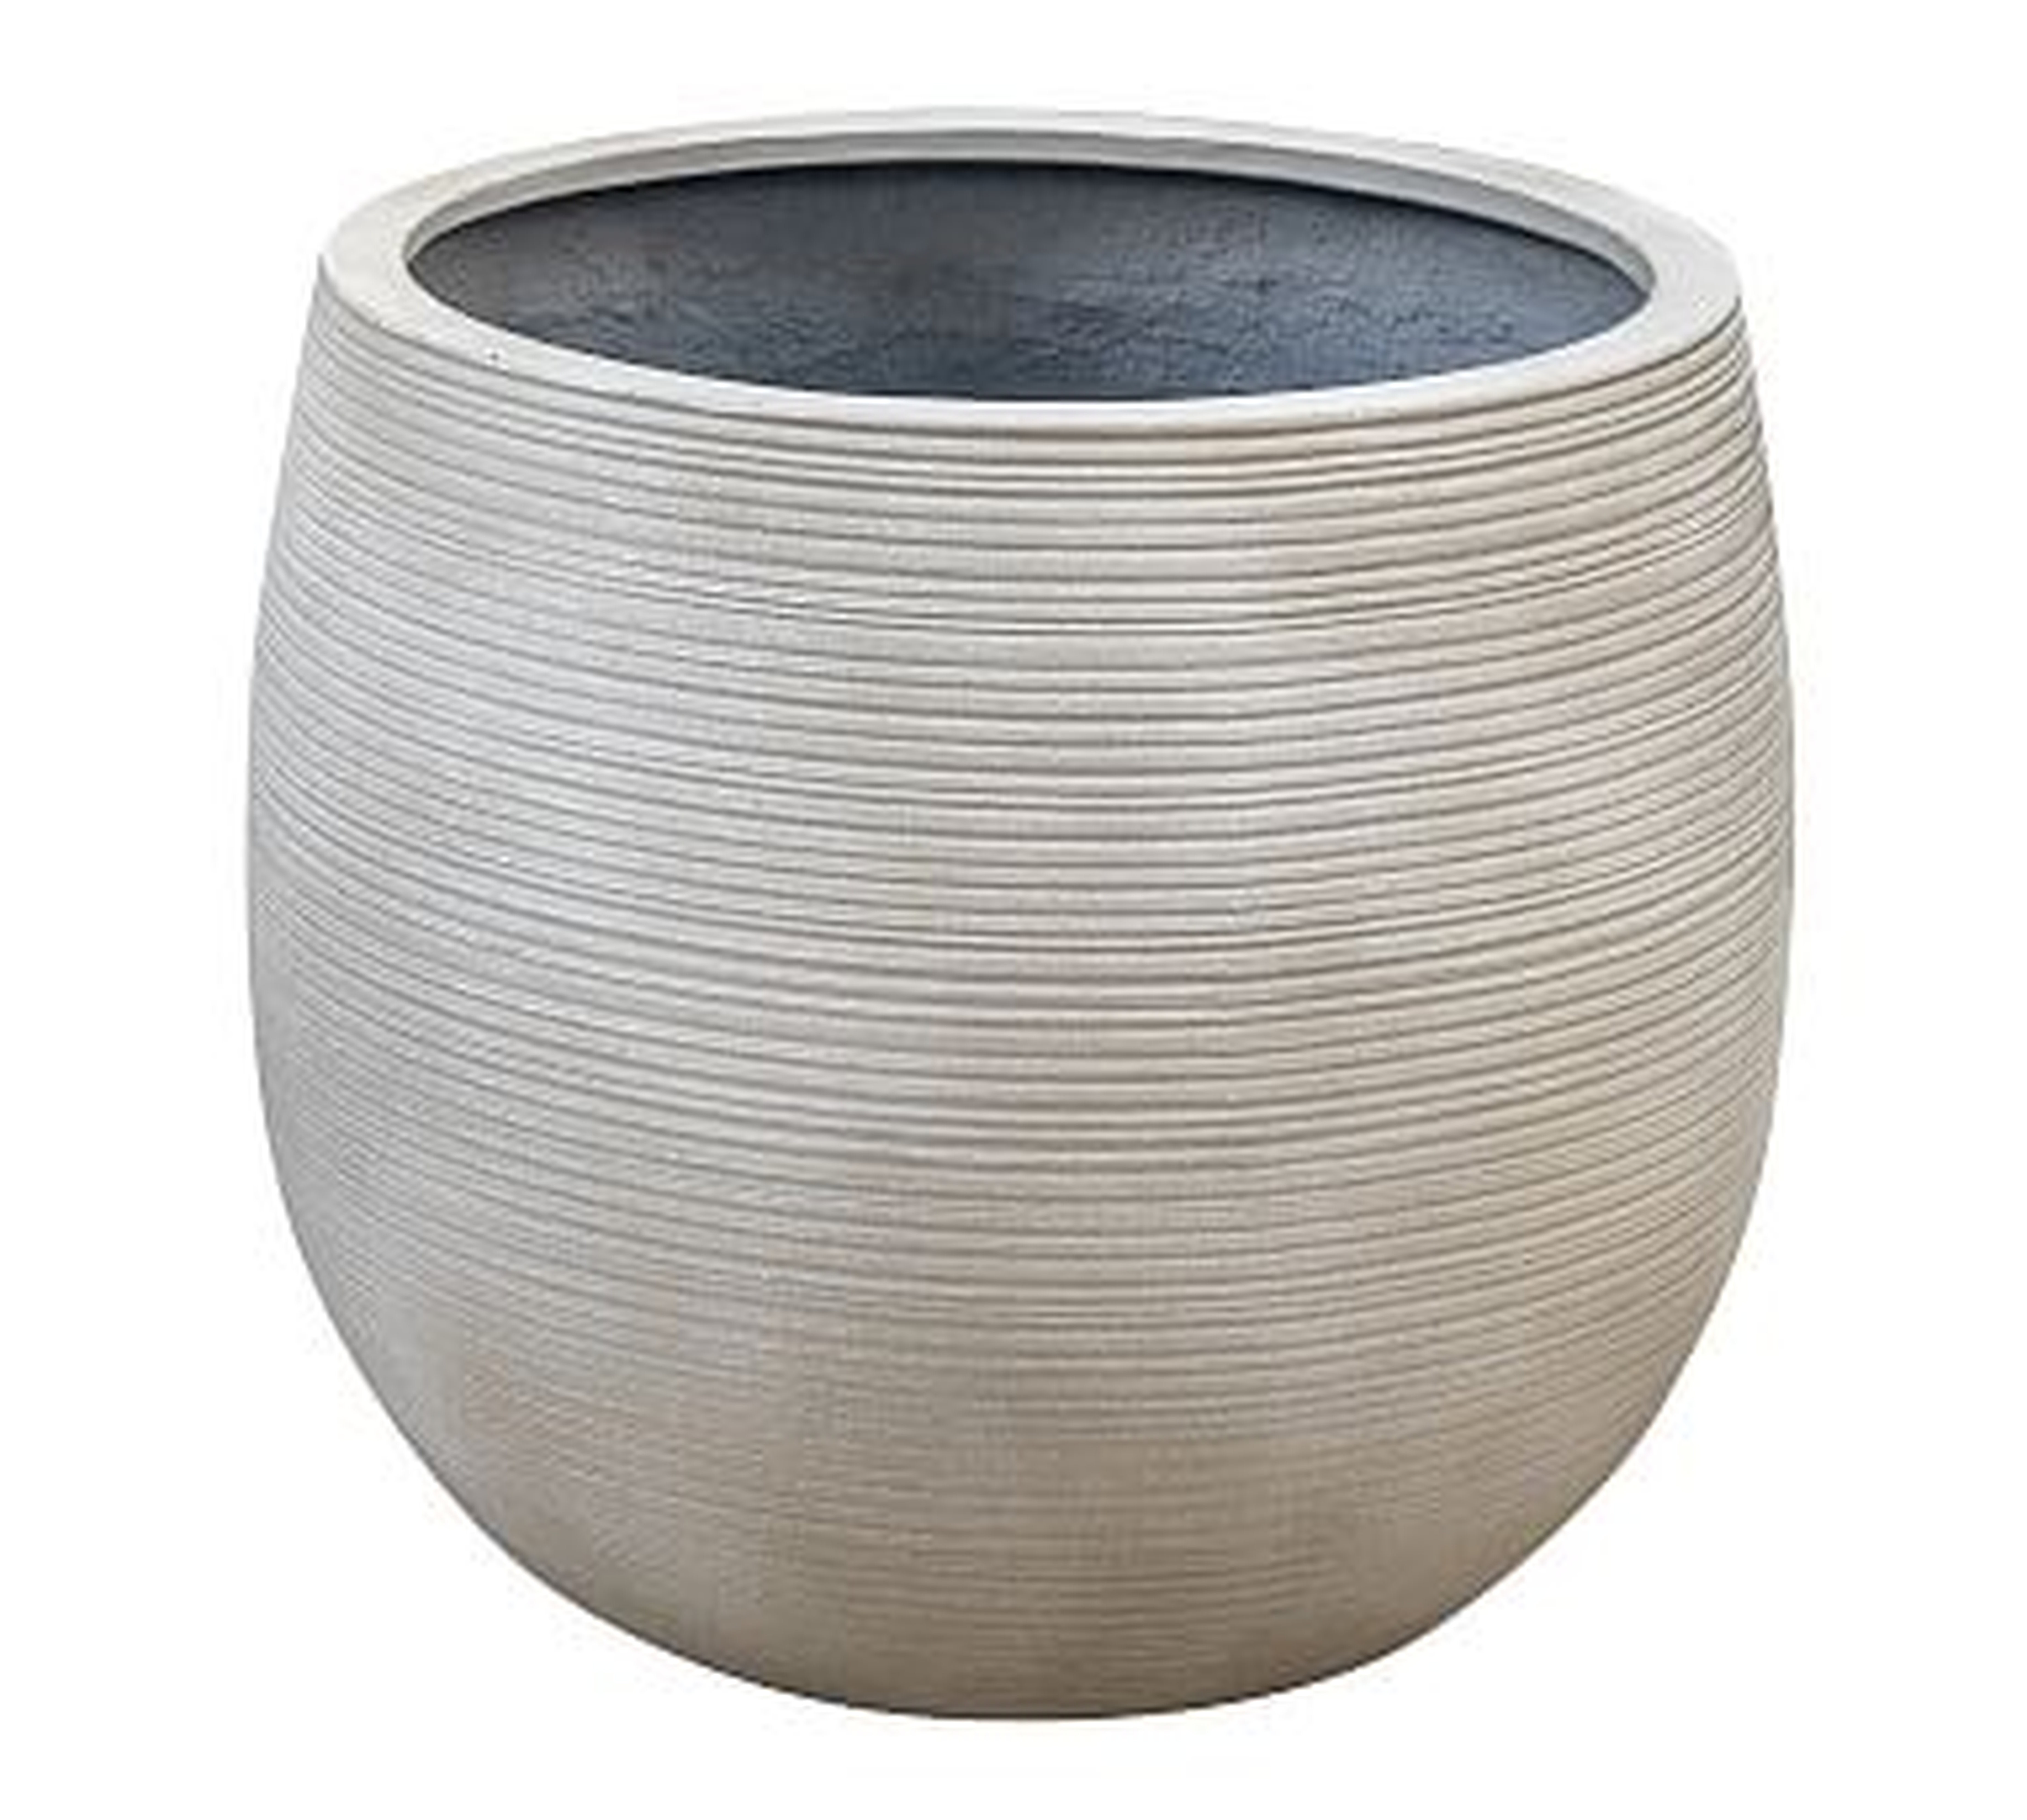 Jax Clay Planter, Cement - Large - Pottery Barn